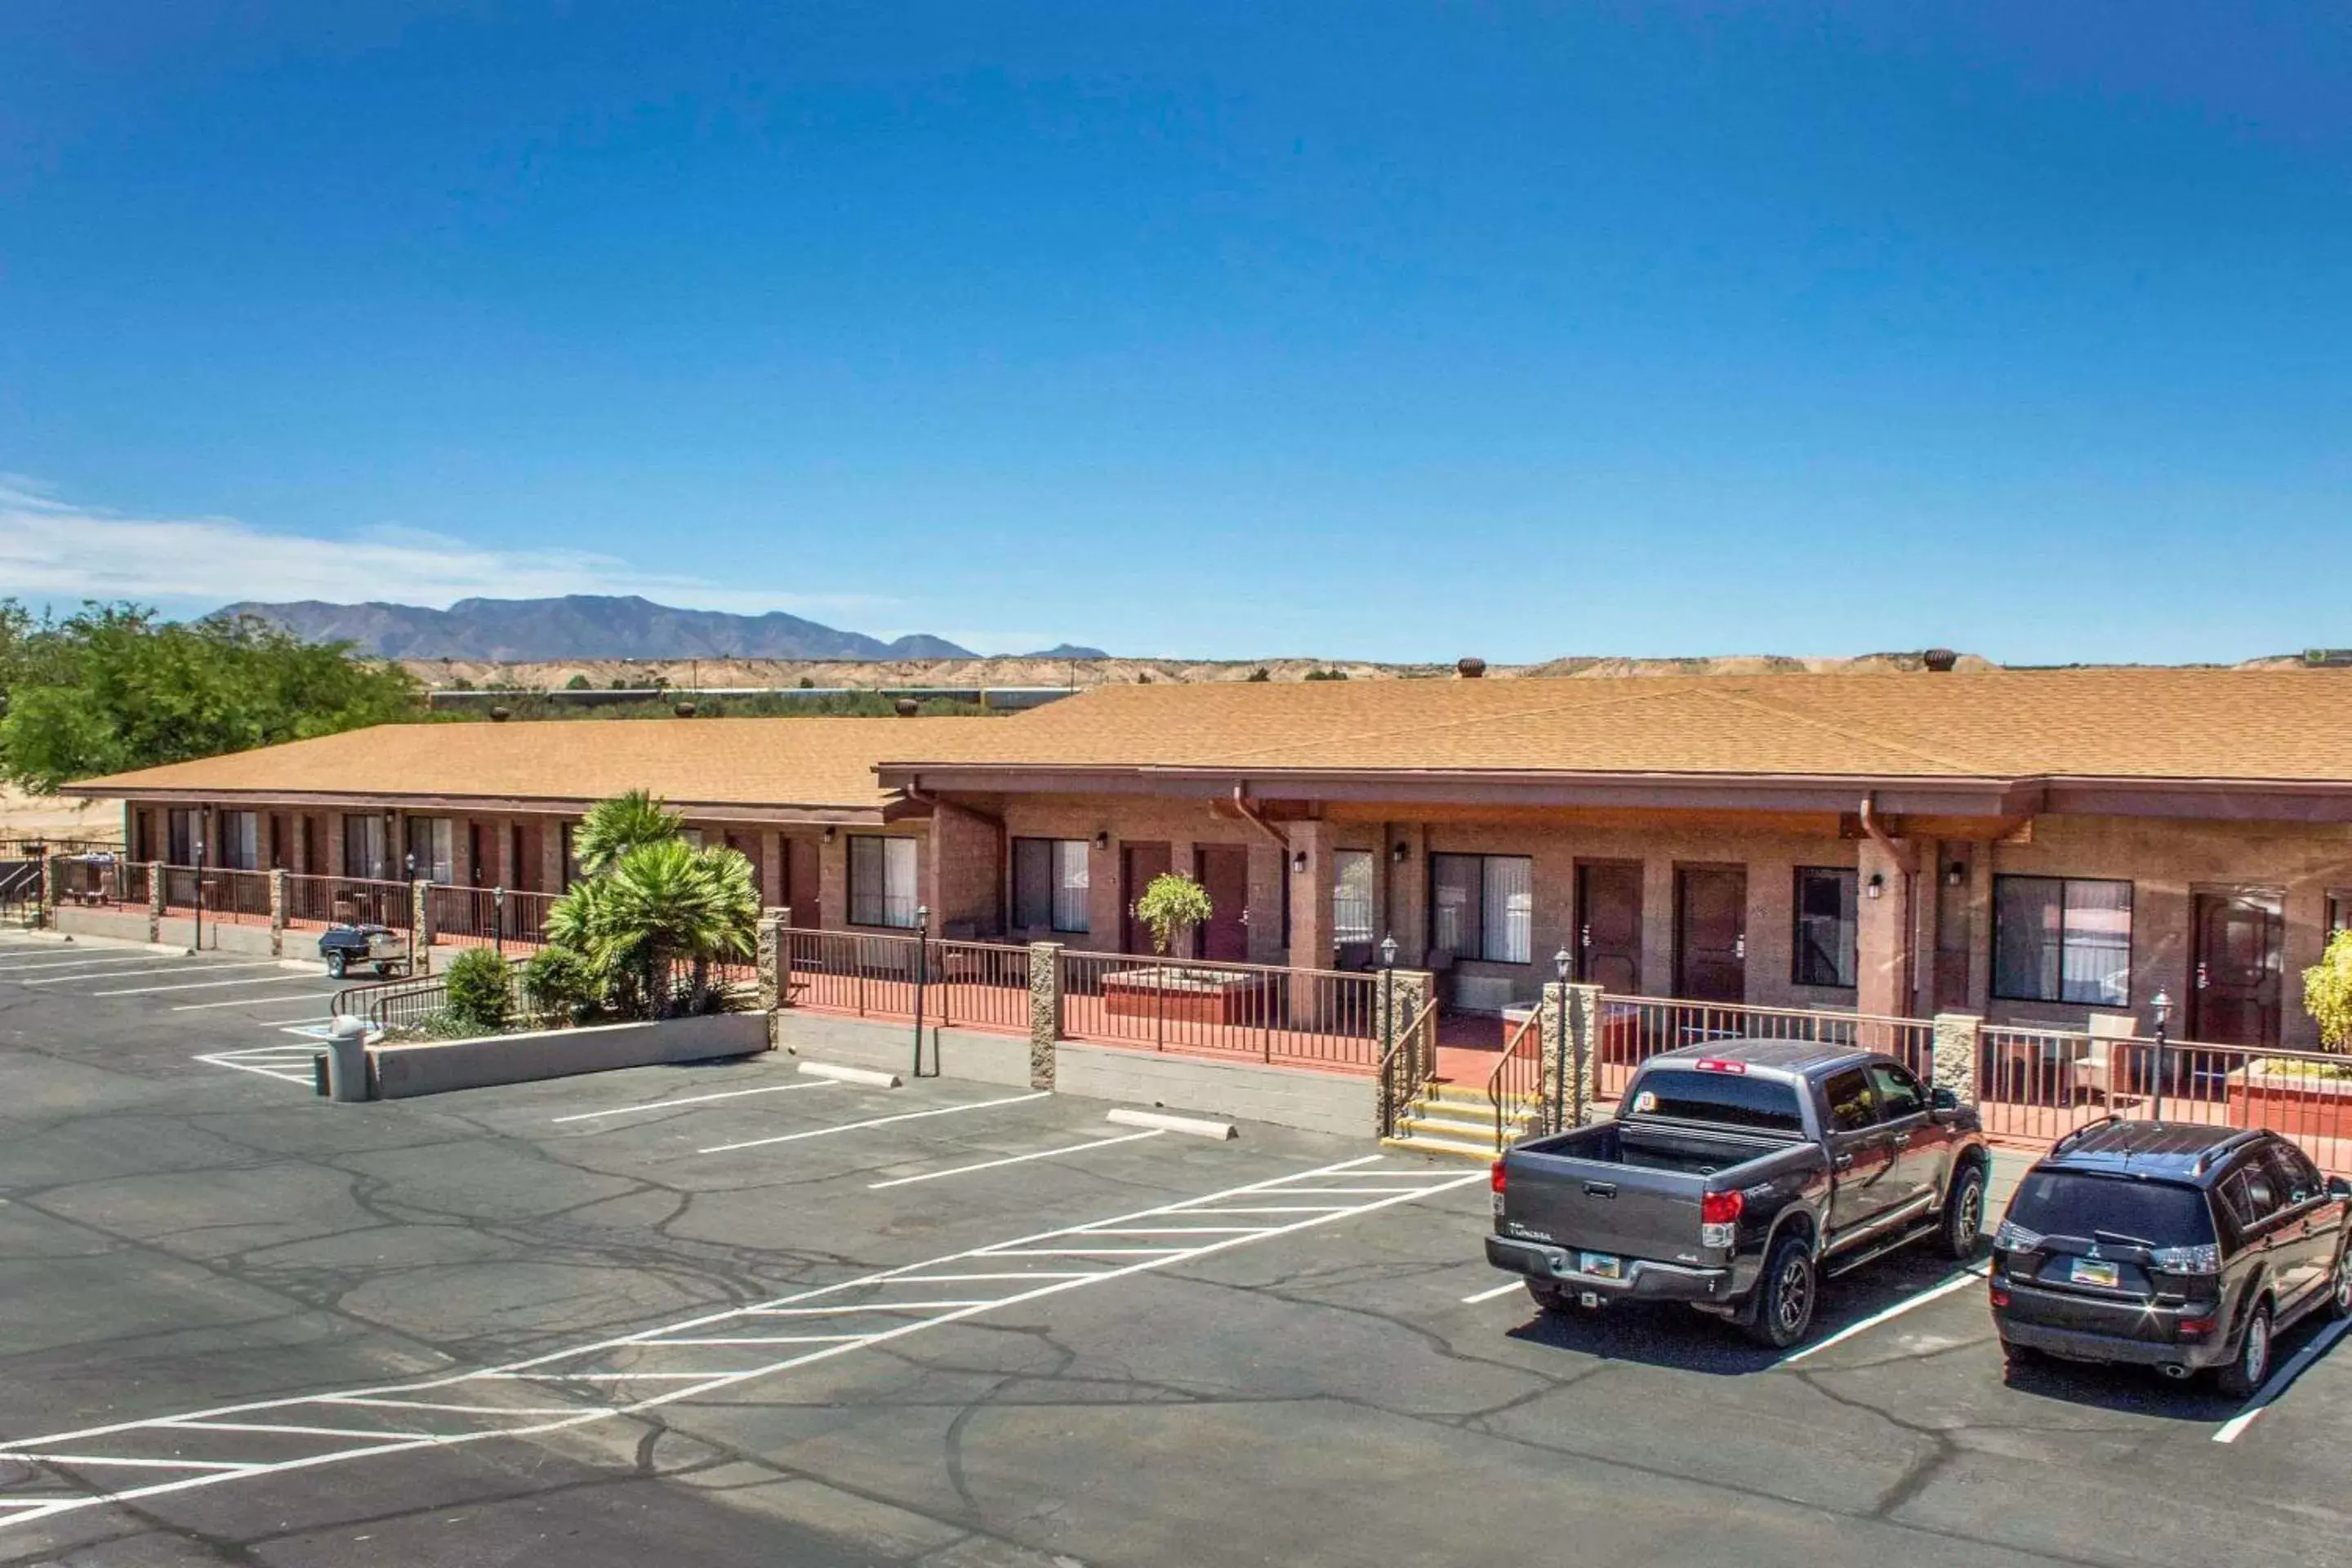 Property Building in Quality Inn Benson I-10 Exit 304